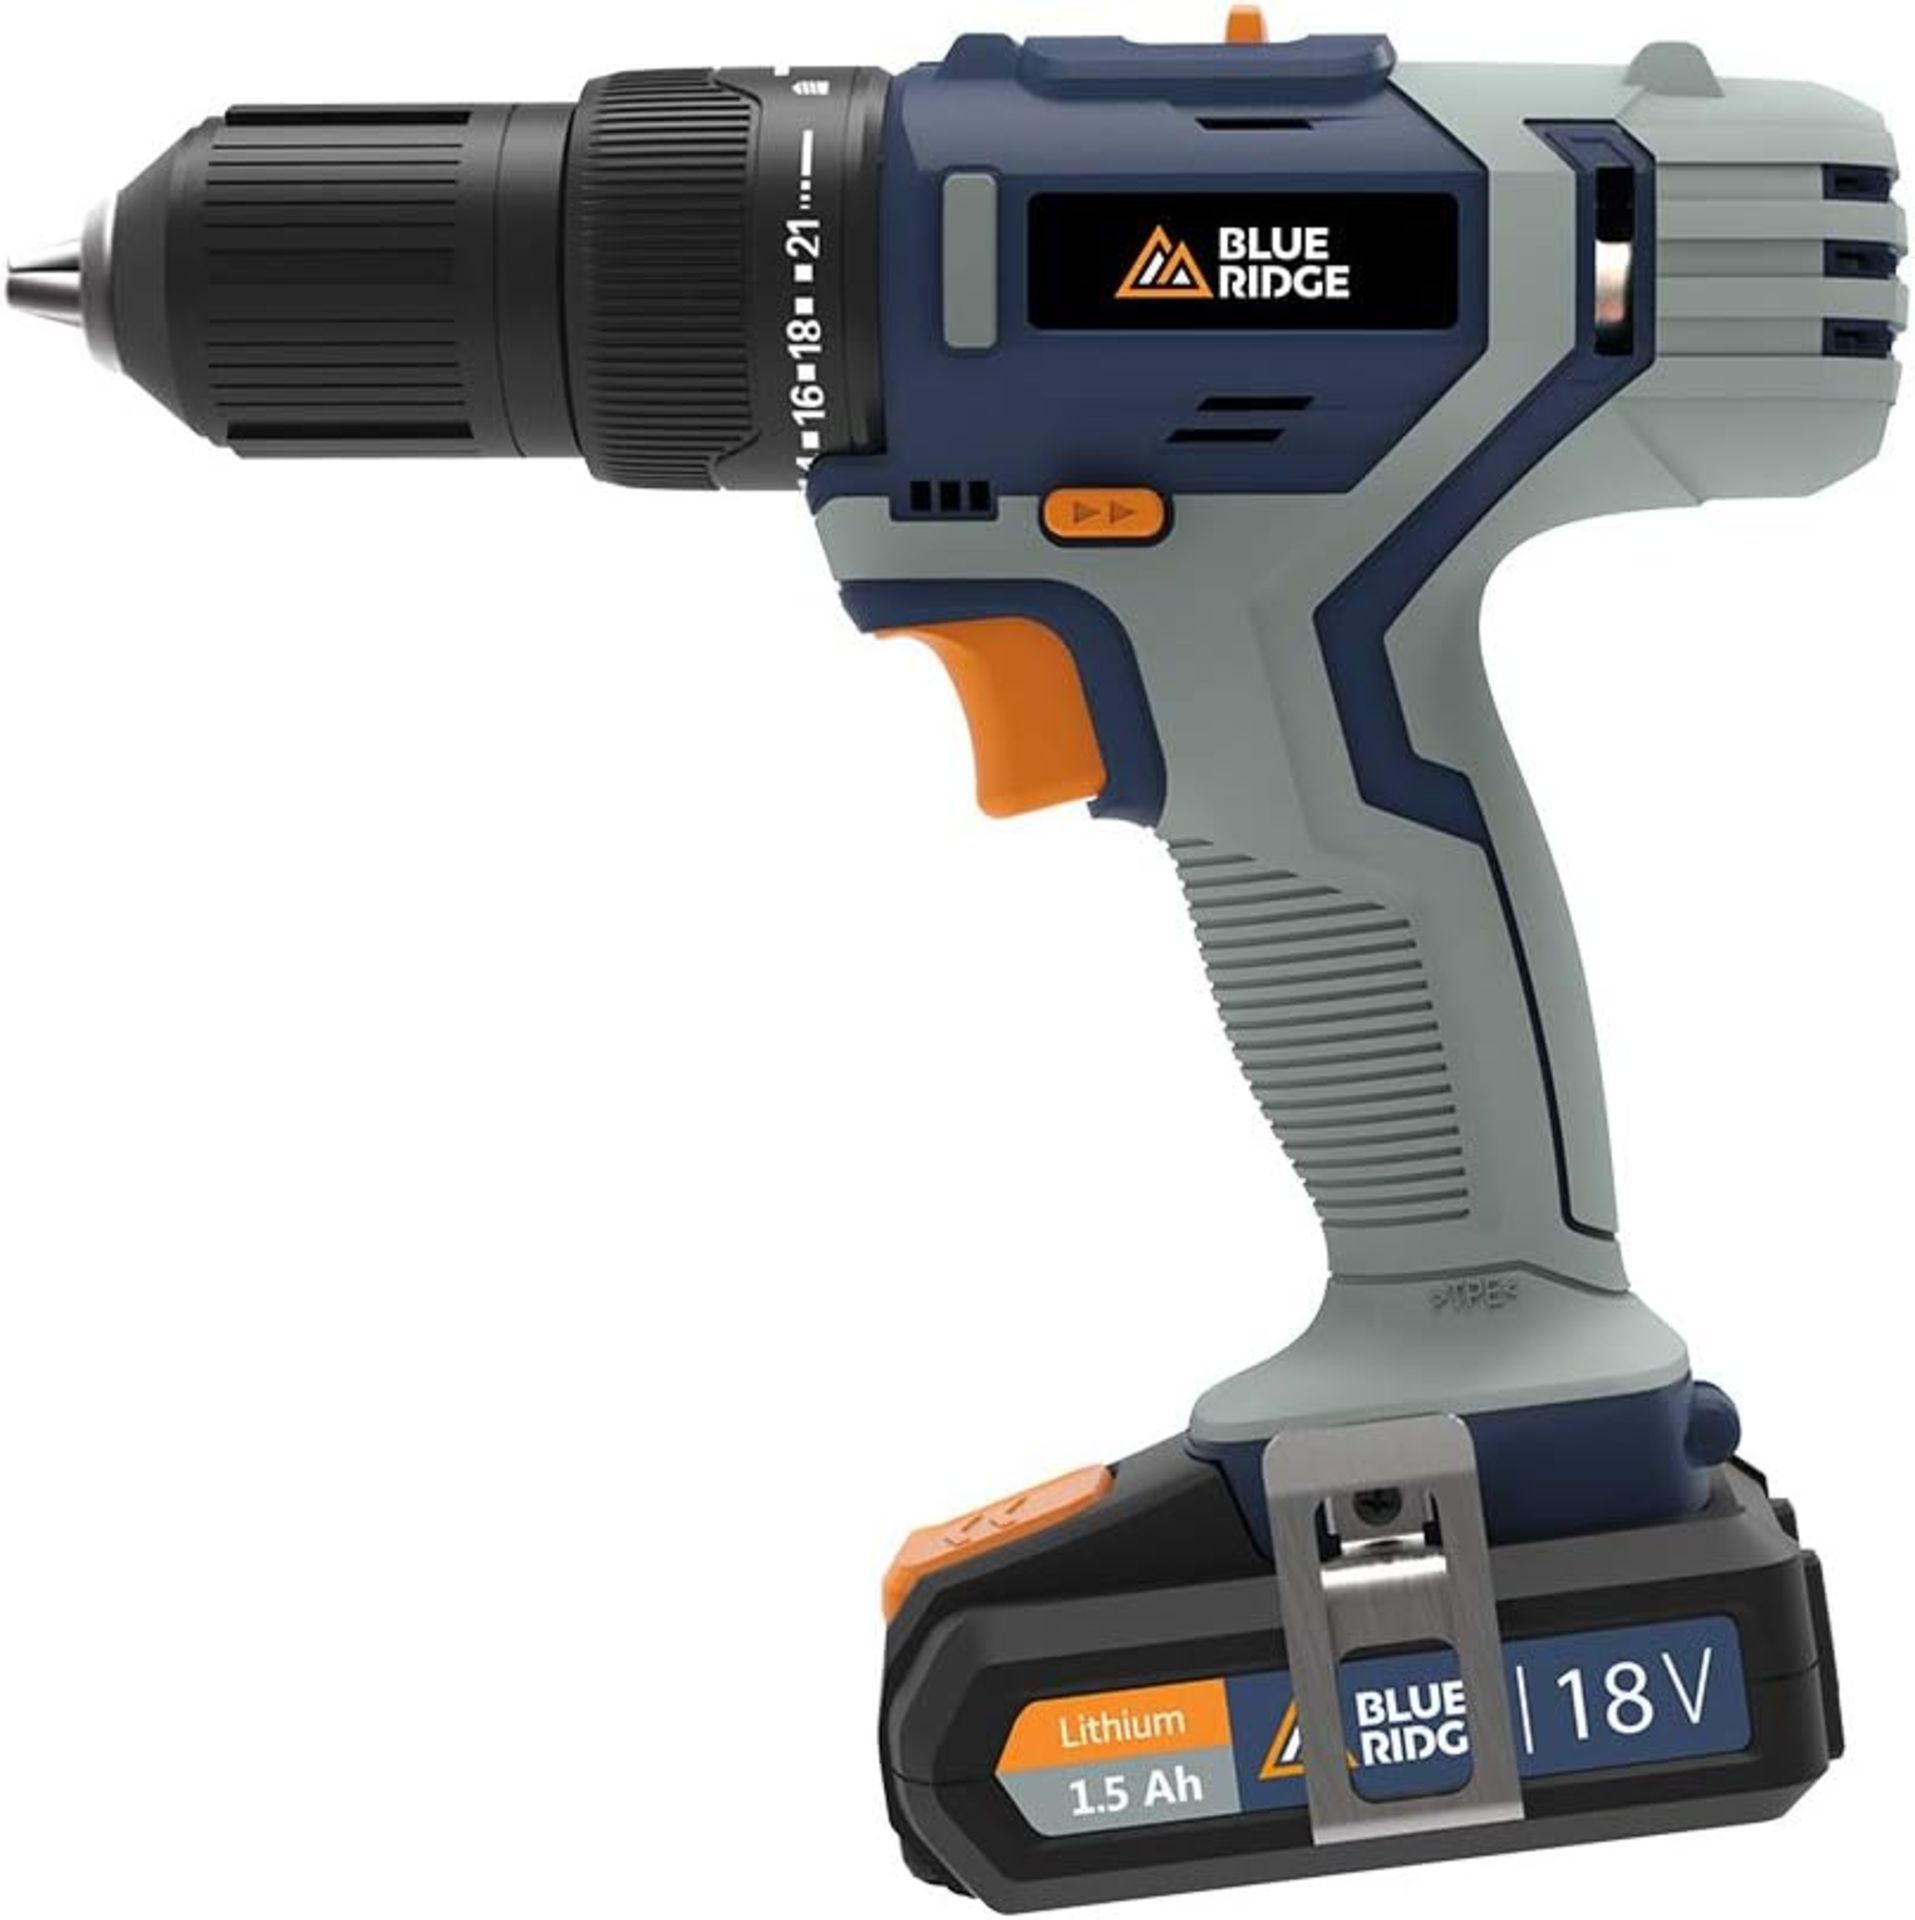 2x NEW & BOXED BLUE RIDGE 18V Cordless Hammer Drill with 2 x 1.5 Ah Li-ion Batteries & 43 Piece - Image 2 of 6